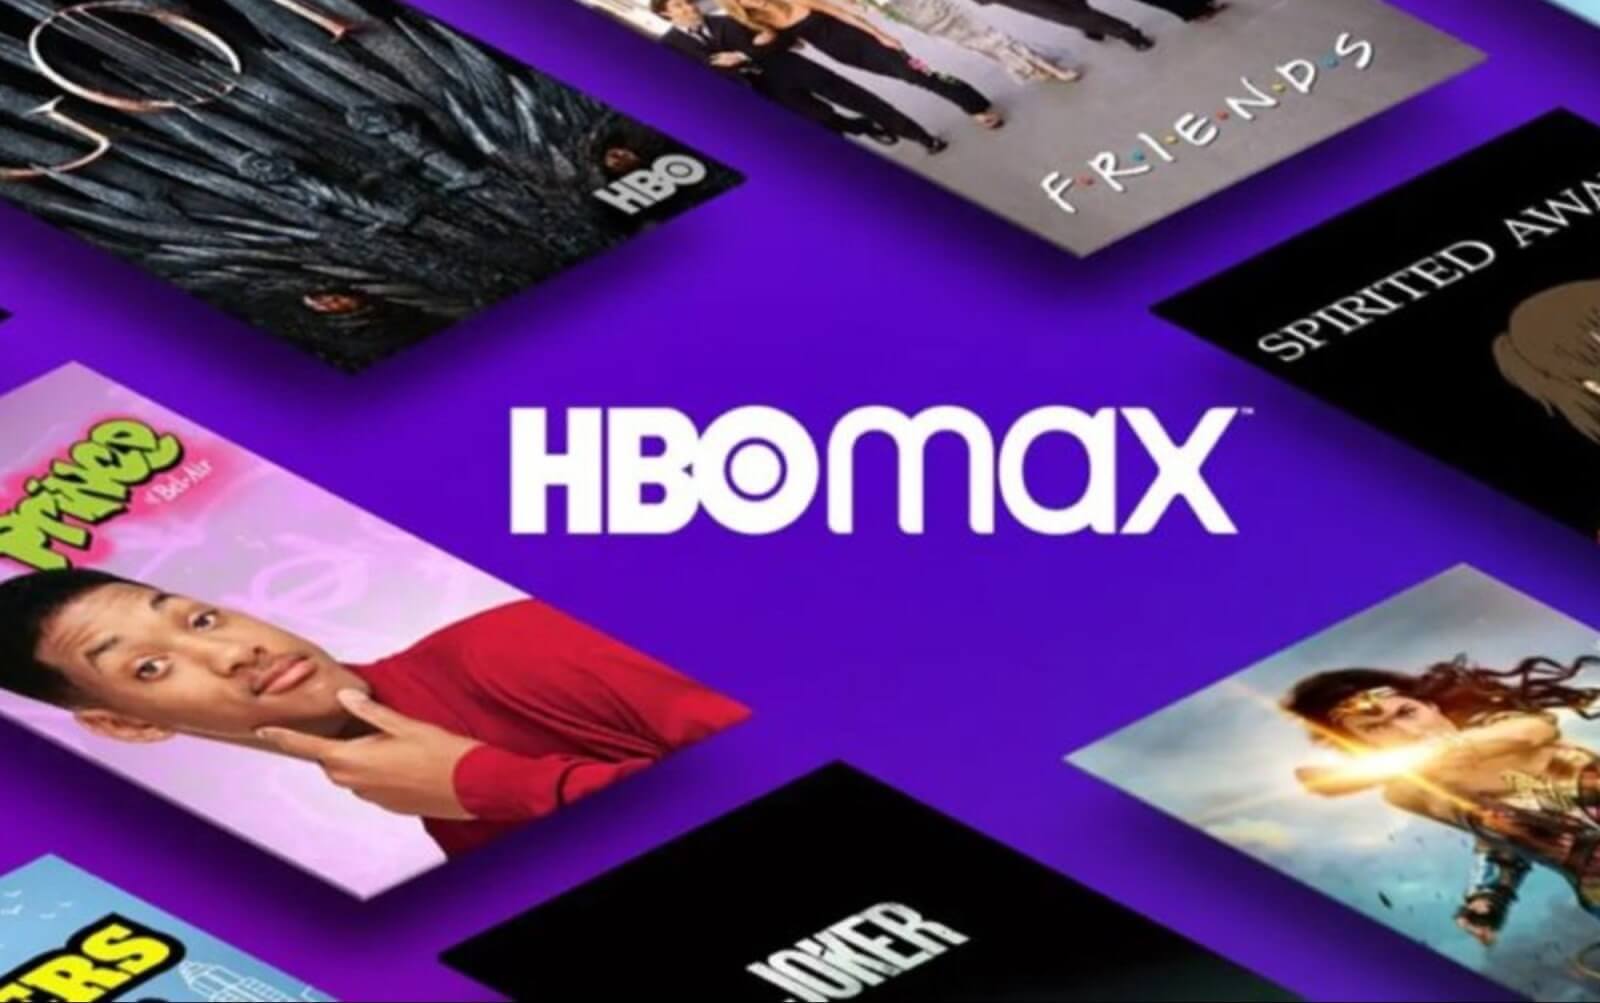 What to watch on HBO Max outside usa